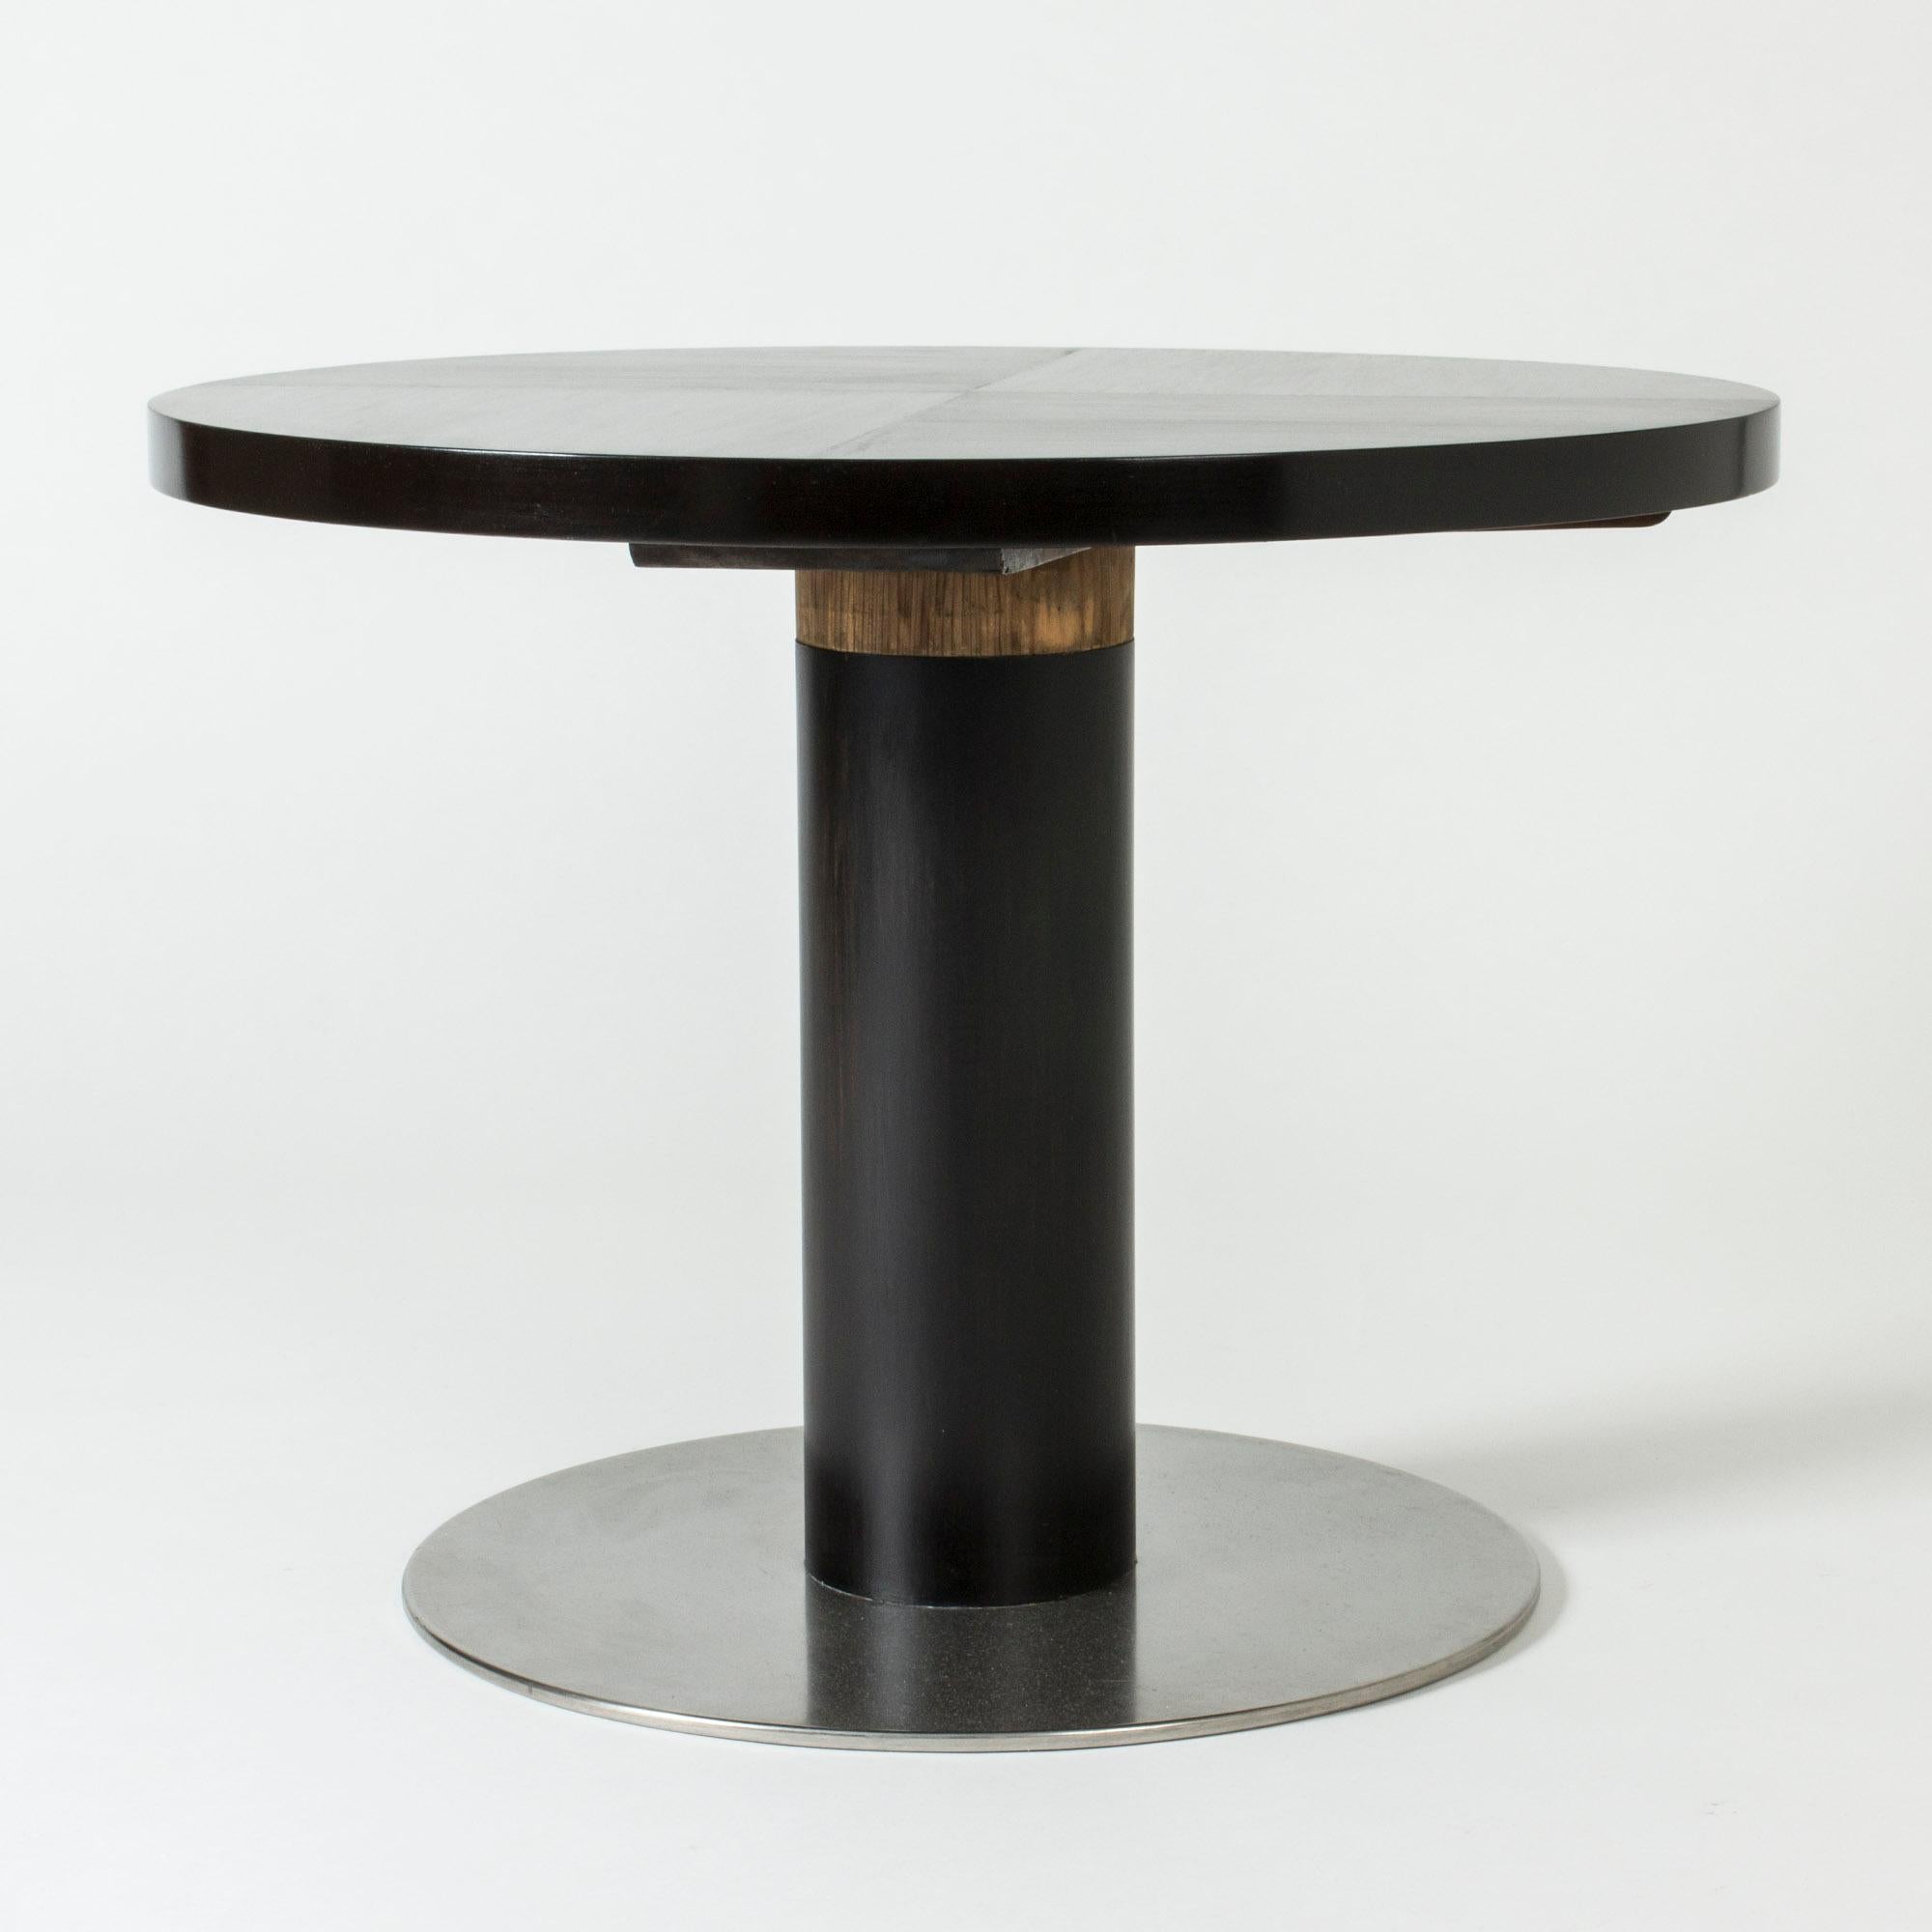 Round “Typenko” coffee or occasional table by Axel Einar Hjorth for NK. Striking in its simplicity, made from black lacquered birch with a stainless steel base.